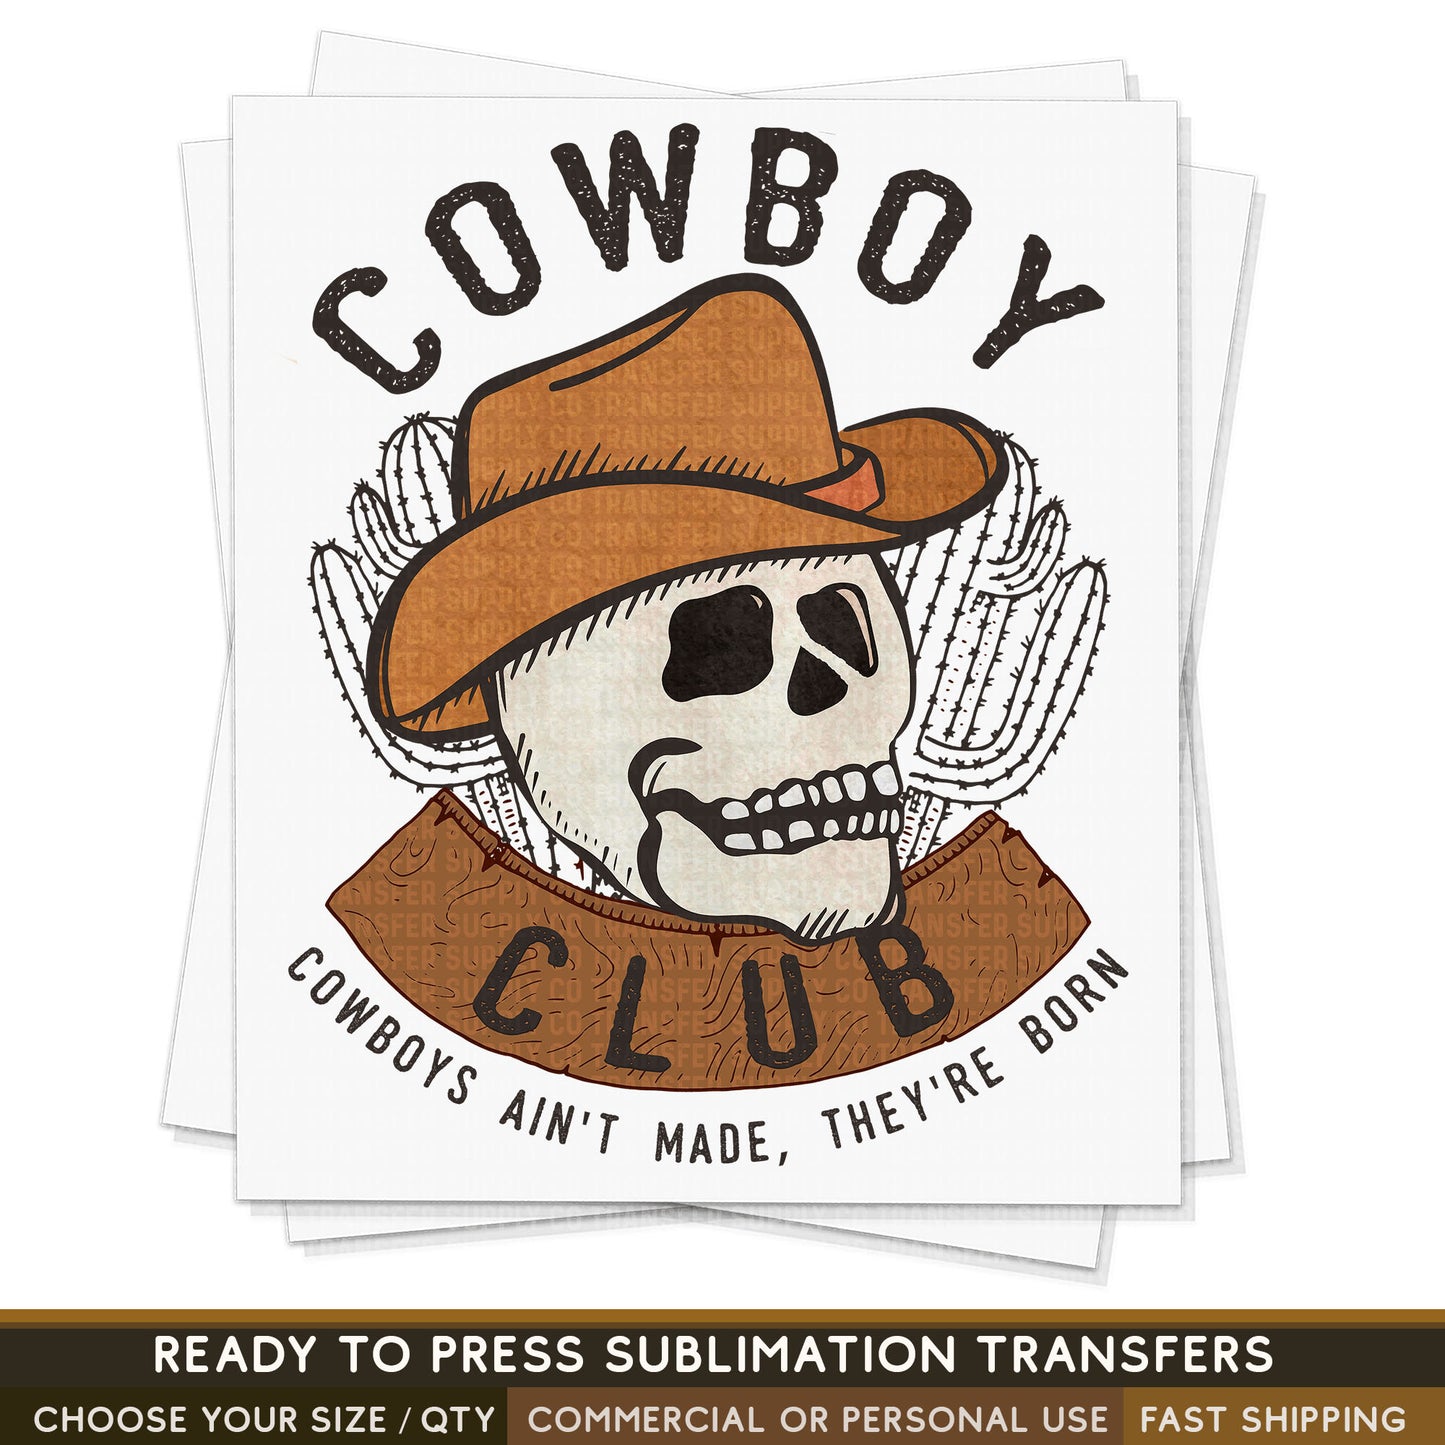 Cowboys Club Sunsets Vintage Wild West Western, Ready To Press Sublimation Transfers, Ready To Press Transfers, Sublimation Prints